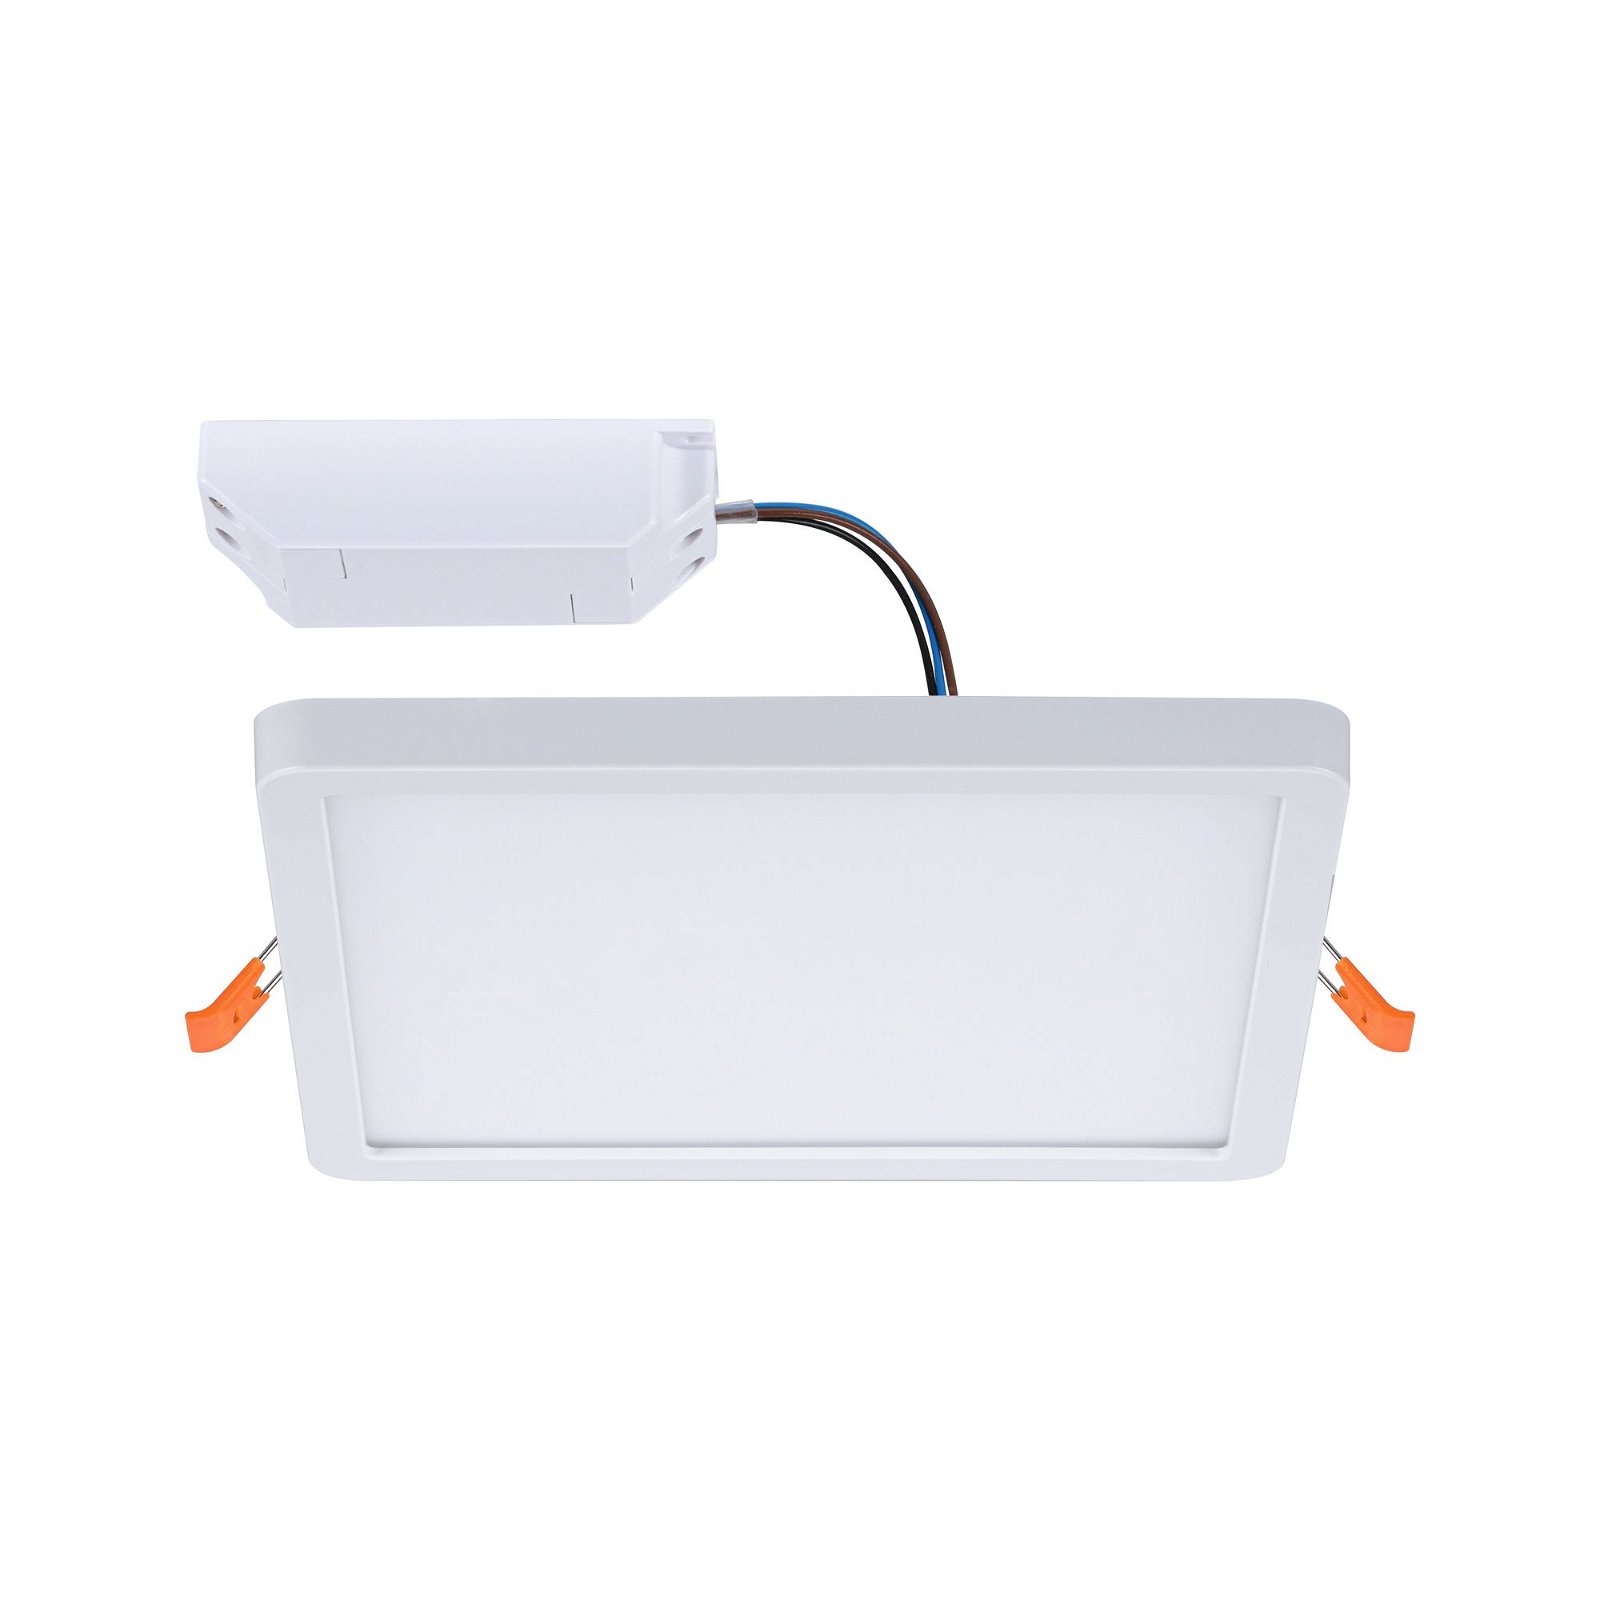 VariFit LED Recessed panel Dim to Warm Areo IP44 square 175x175mm 2000 - 4000K Matt white dimmable